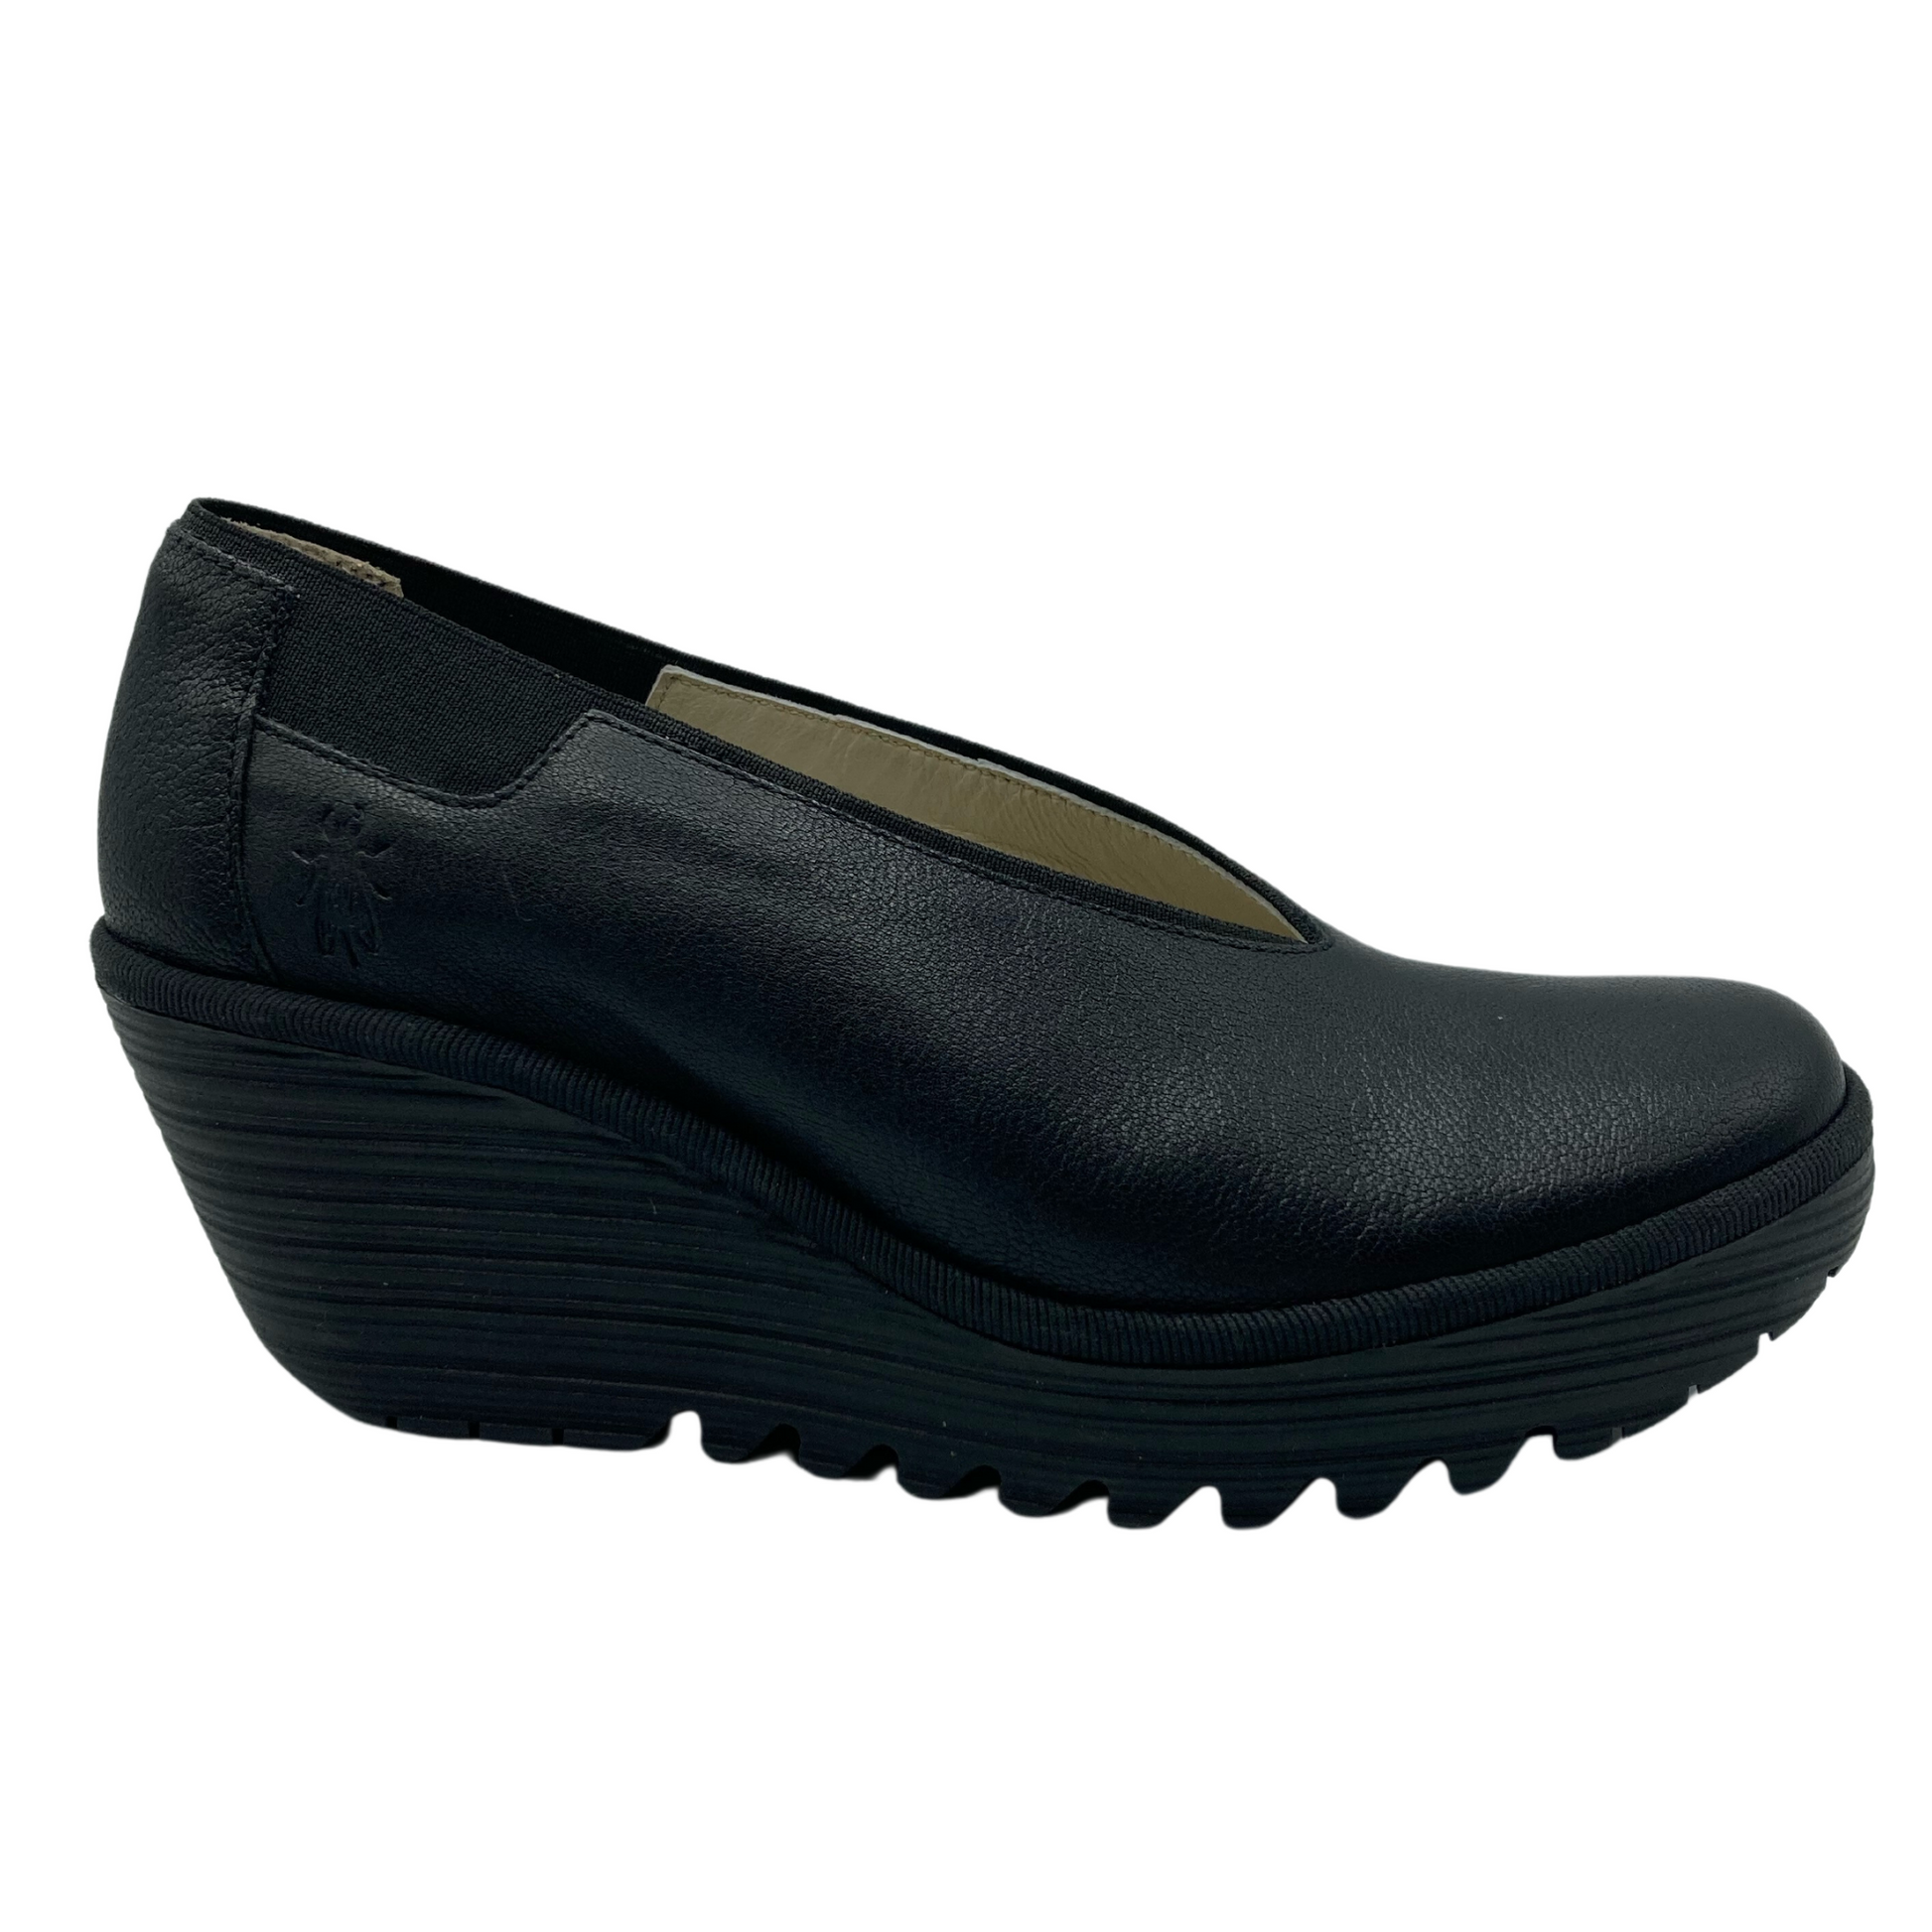 Side view of wedge shoe with black leather upper